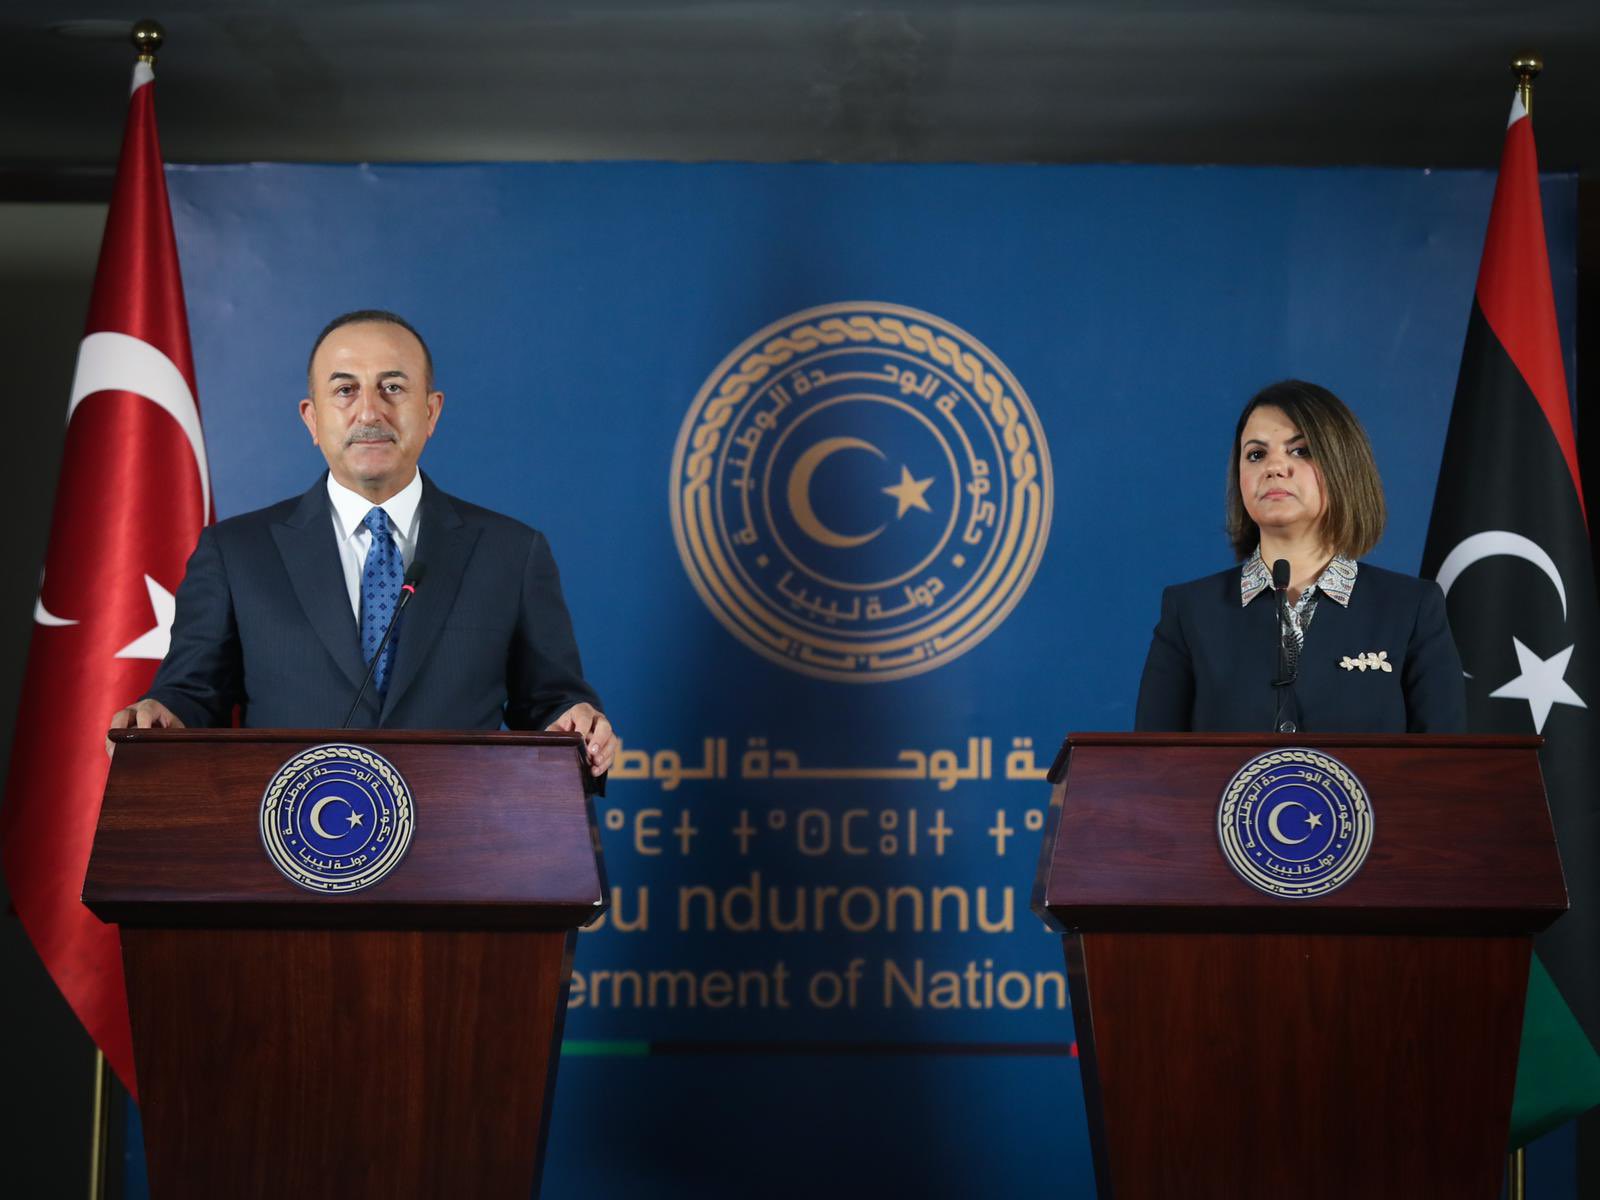 Turkish Foreign Minister Mevlüt Çavuşoğlu (L) and his Libyan counterpart Najla Mangoush signed an MoU on hydrocarbon and gas exploration in the Mediterranean during a meeting in Tripoli on Monday.